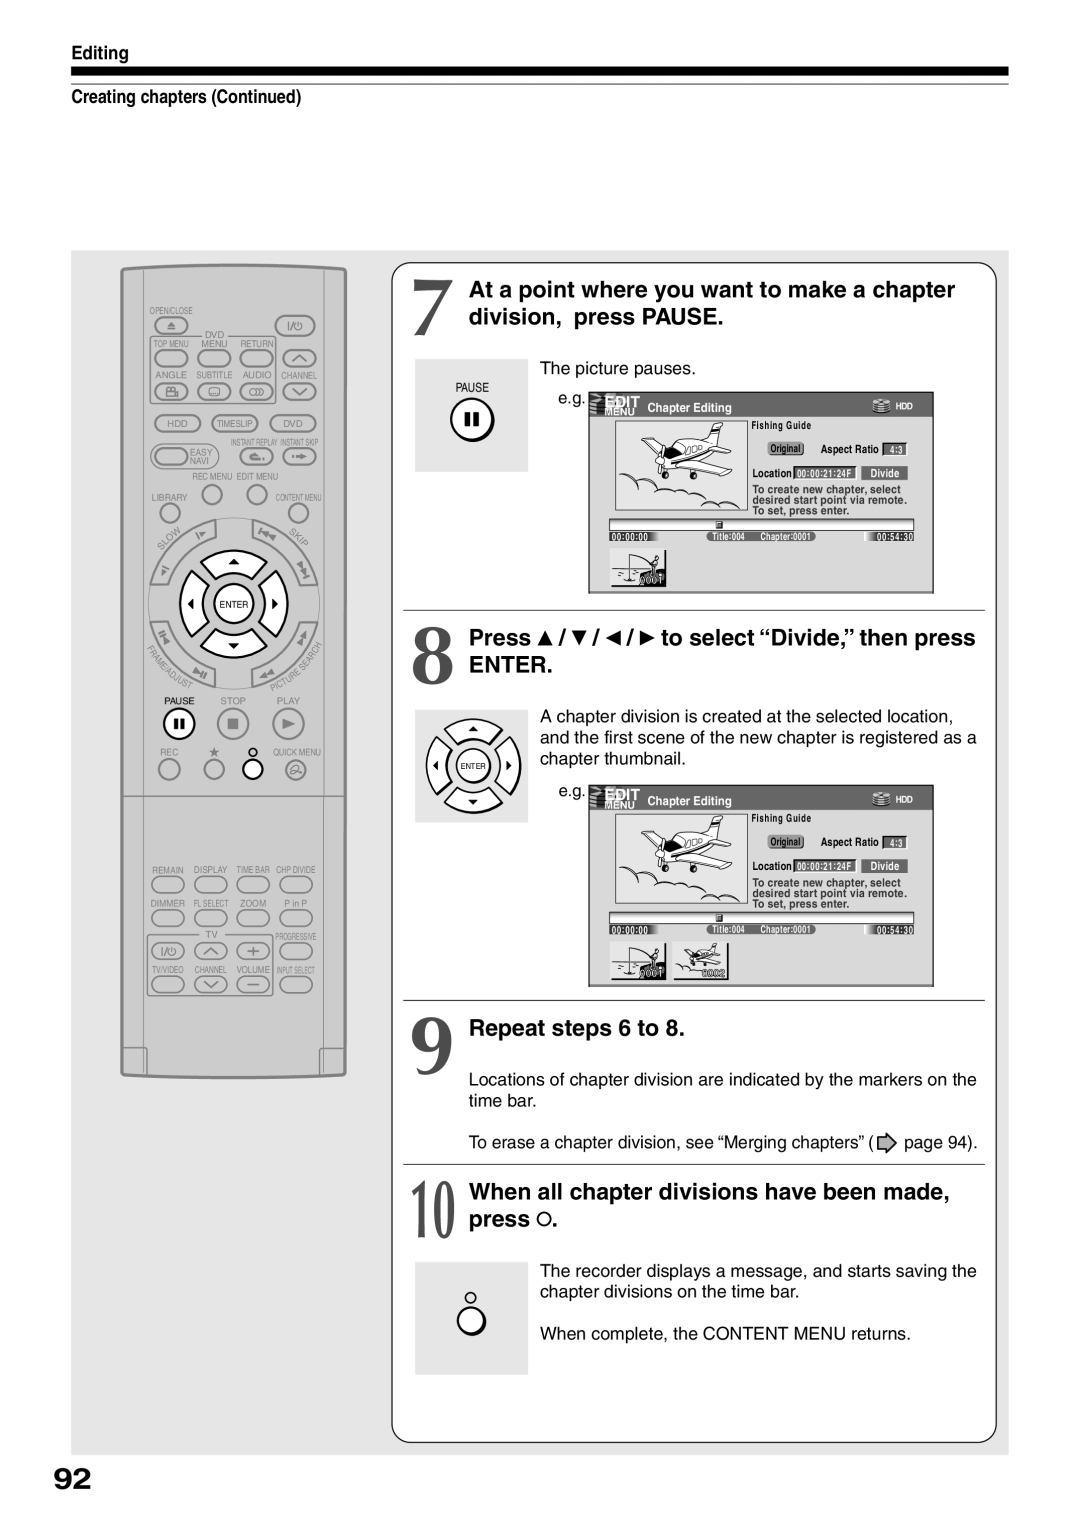 Toshiba RD-XS32SC, RD-XS32SU owner manual Press / / / to select “Divide,” then press, Enter, Repeat steps 6 to 